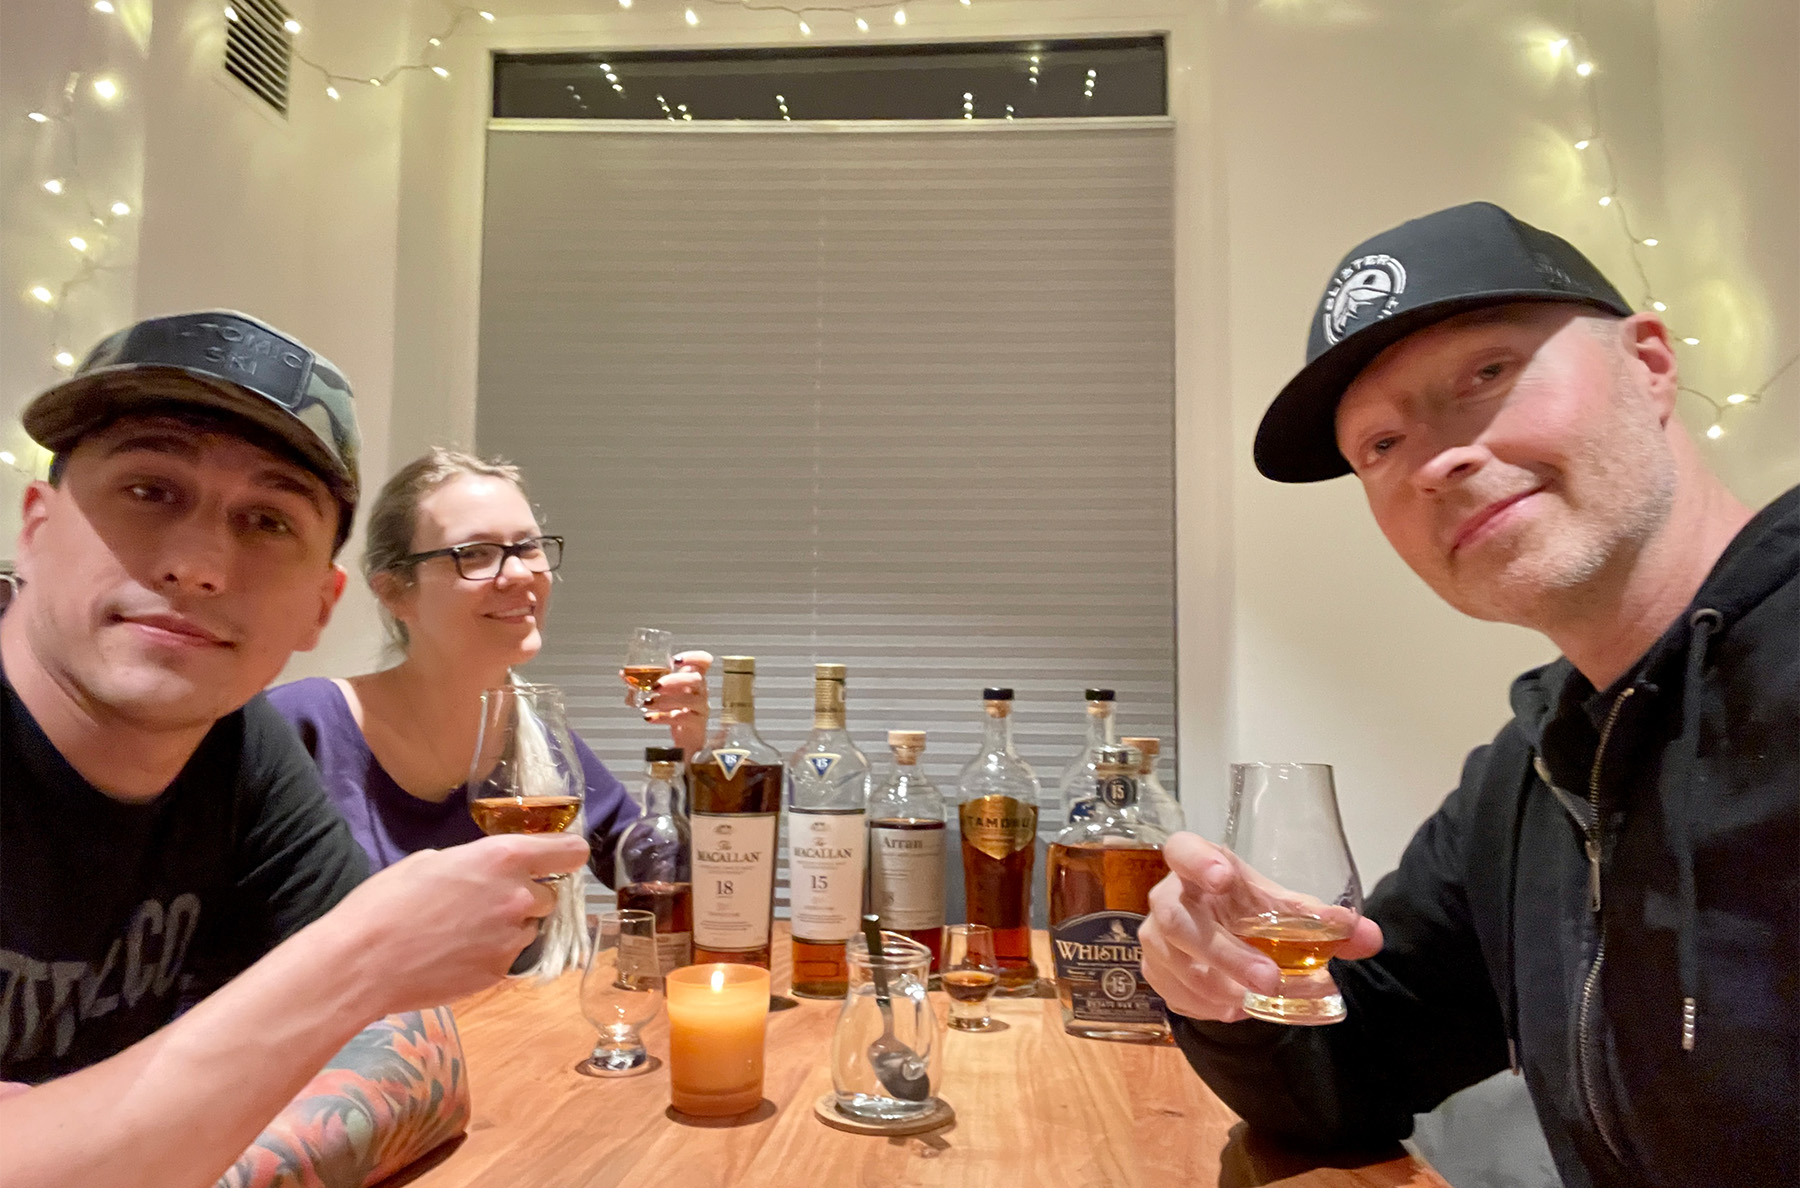 When Atomic Ski Boots Product Manager, Matt Manser, isn’t nerding out about ski boots … he’s nerding out about Scotch. So in this CRAFTED podcast, Matt and Jonathan discuss butt casks and blood tubs; why cask size matters; barrel-aged ski boots; tea spoons; single malts vs. blends; and more.